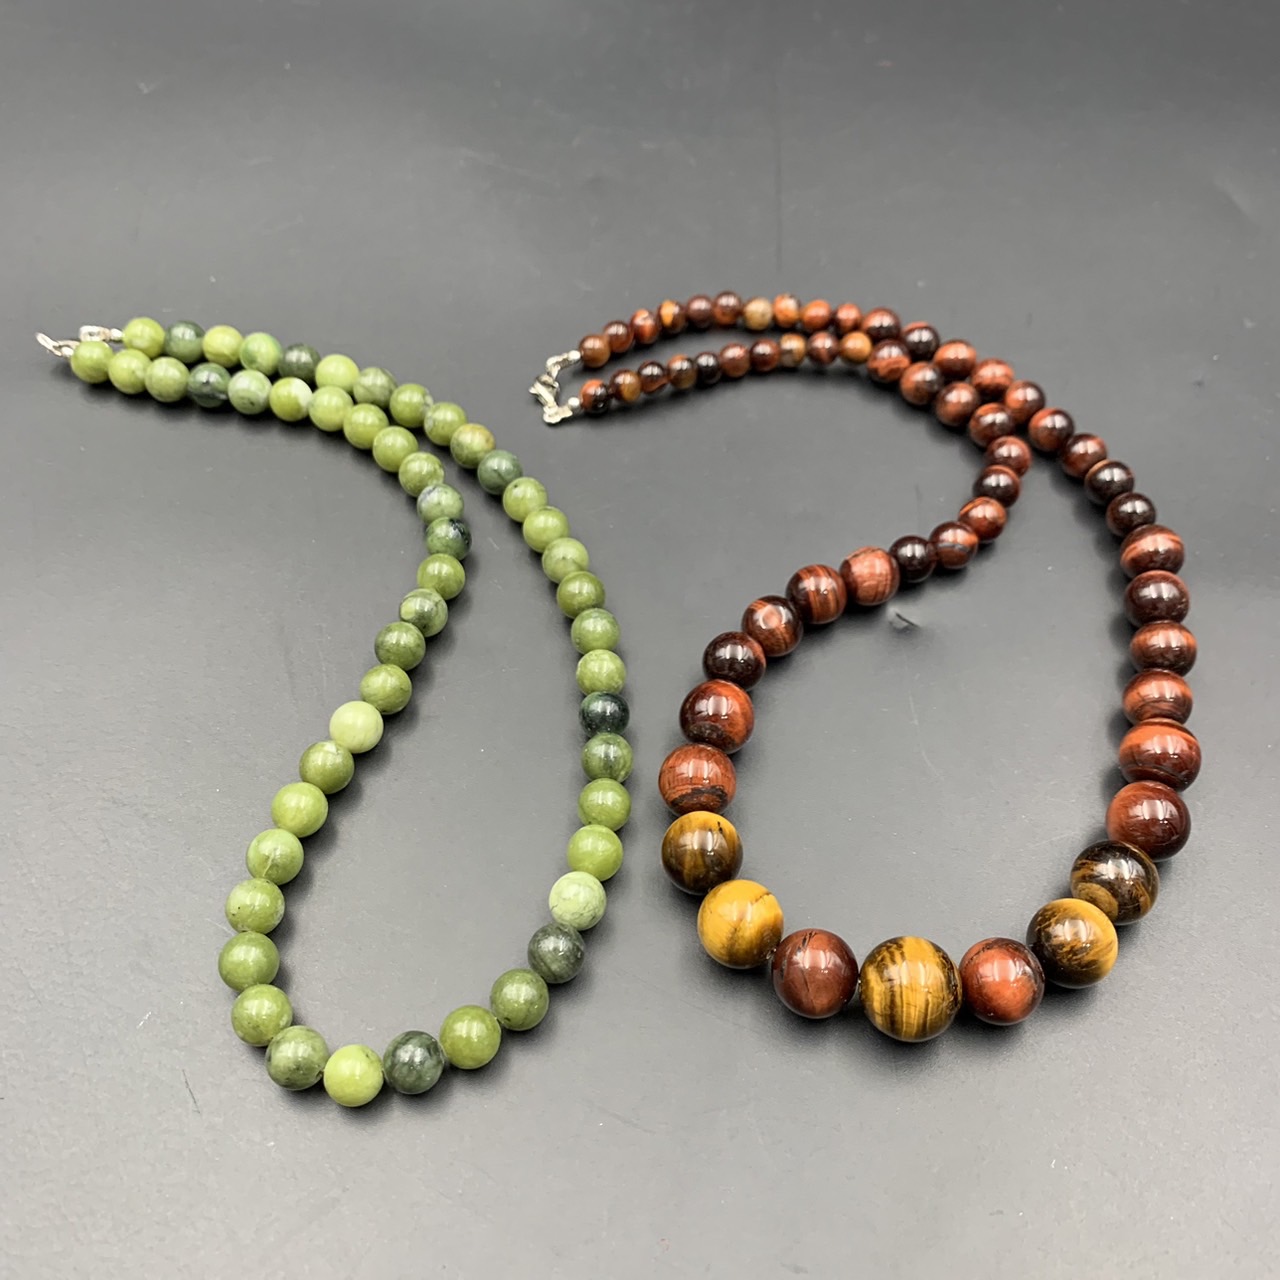 Awesome Natural Tiger Eye & Green Stone Beads 2 Necklace - Image 2 of 3